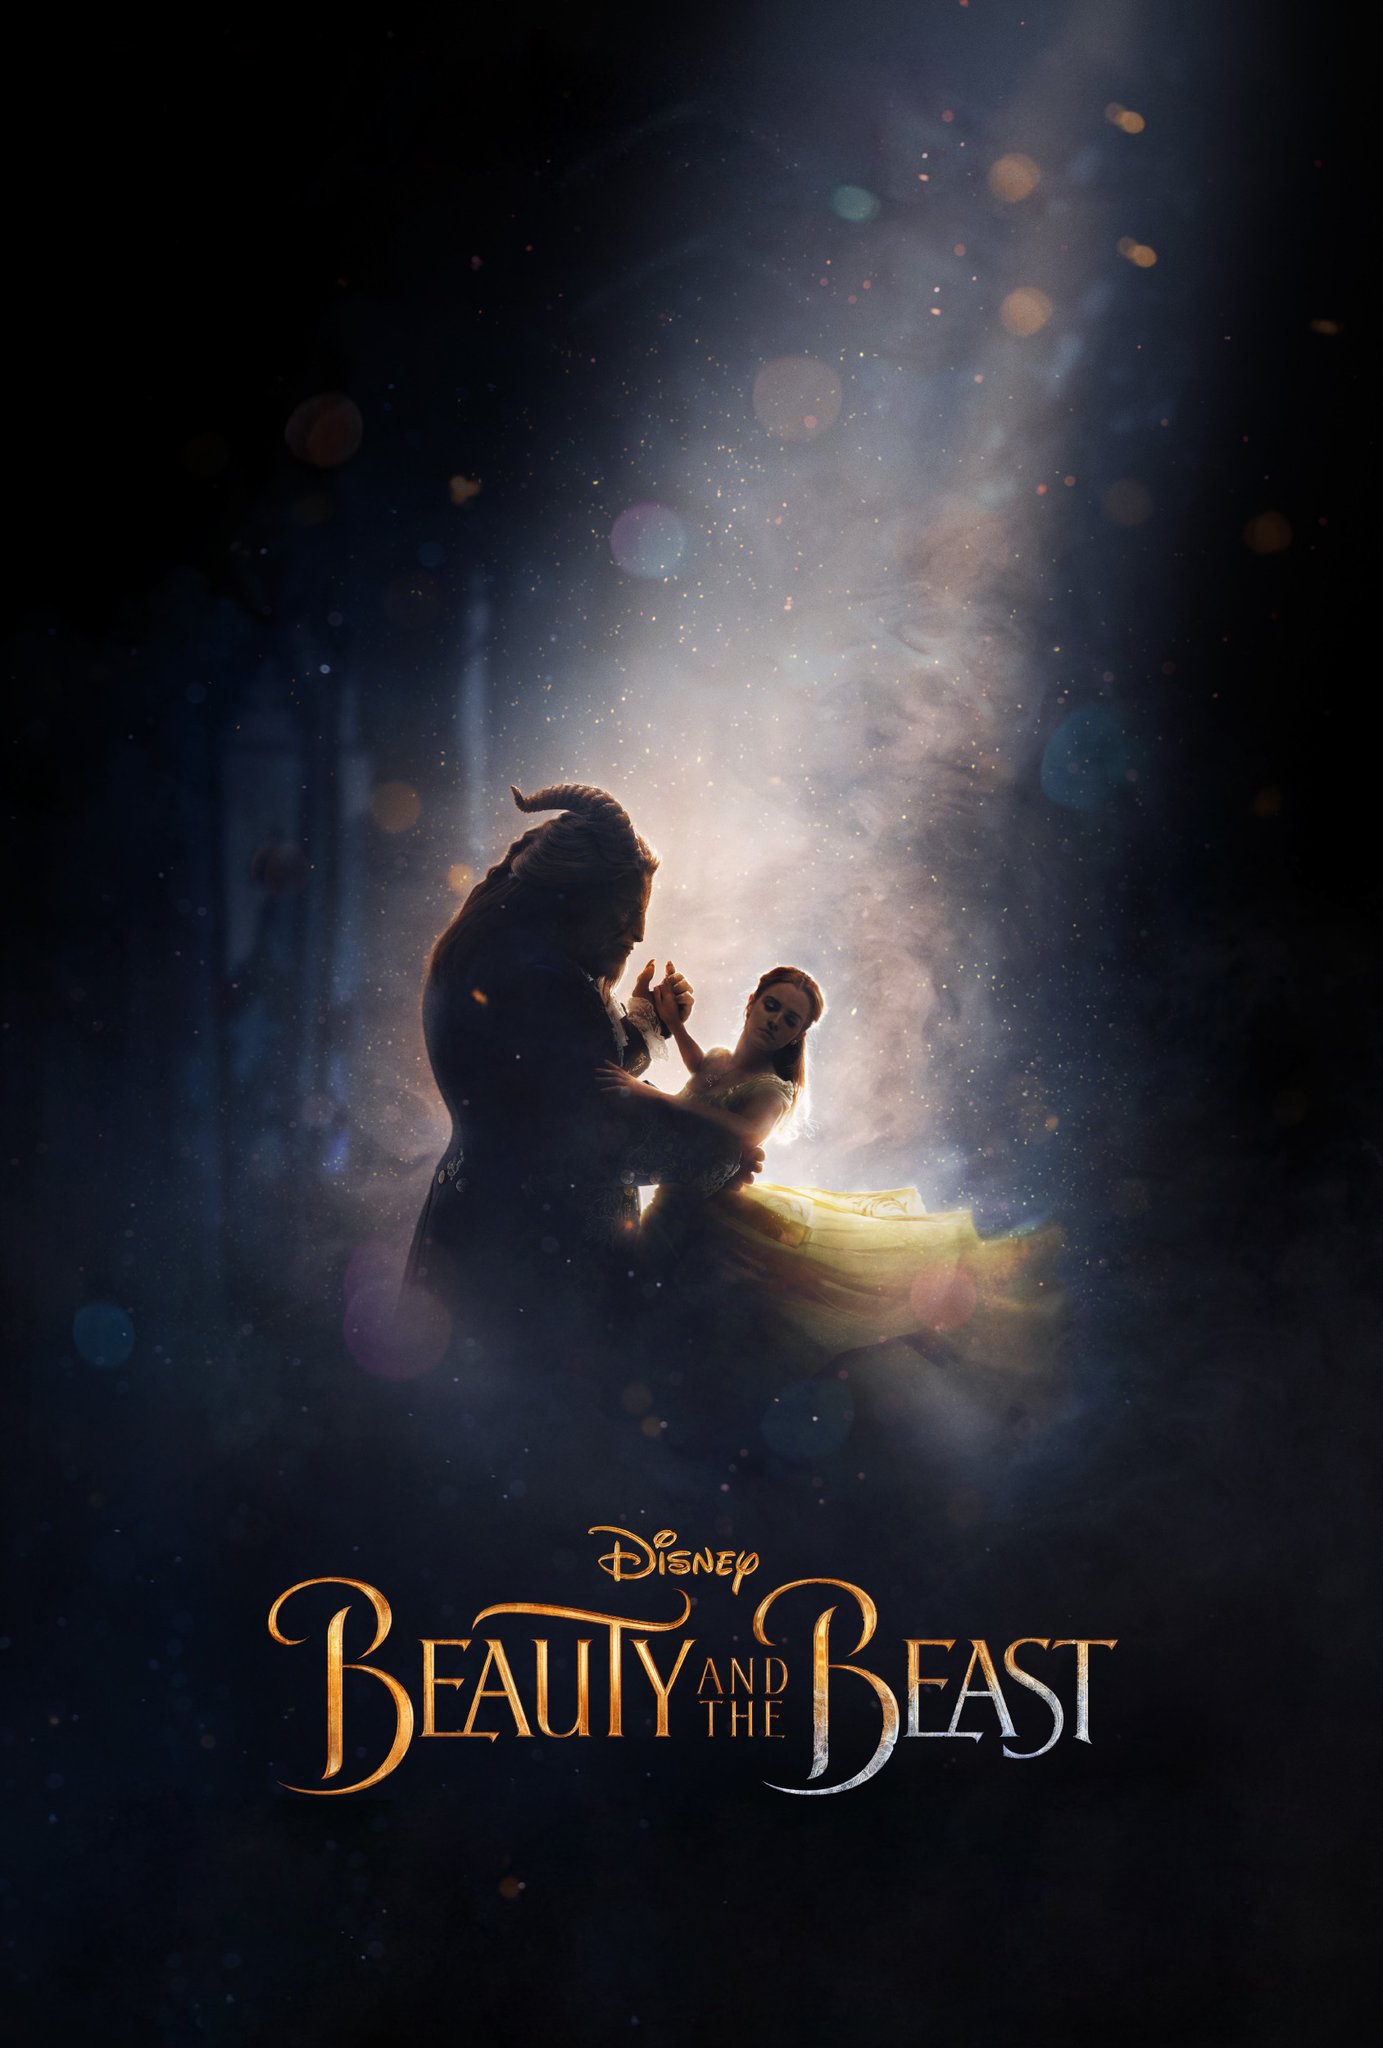 How long is the beauty and the beast movie 2017 Beauty And The Beast 2017 First Impressions Reviews